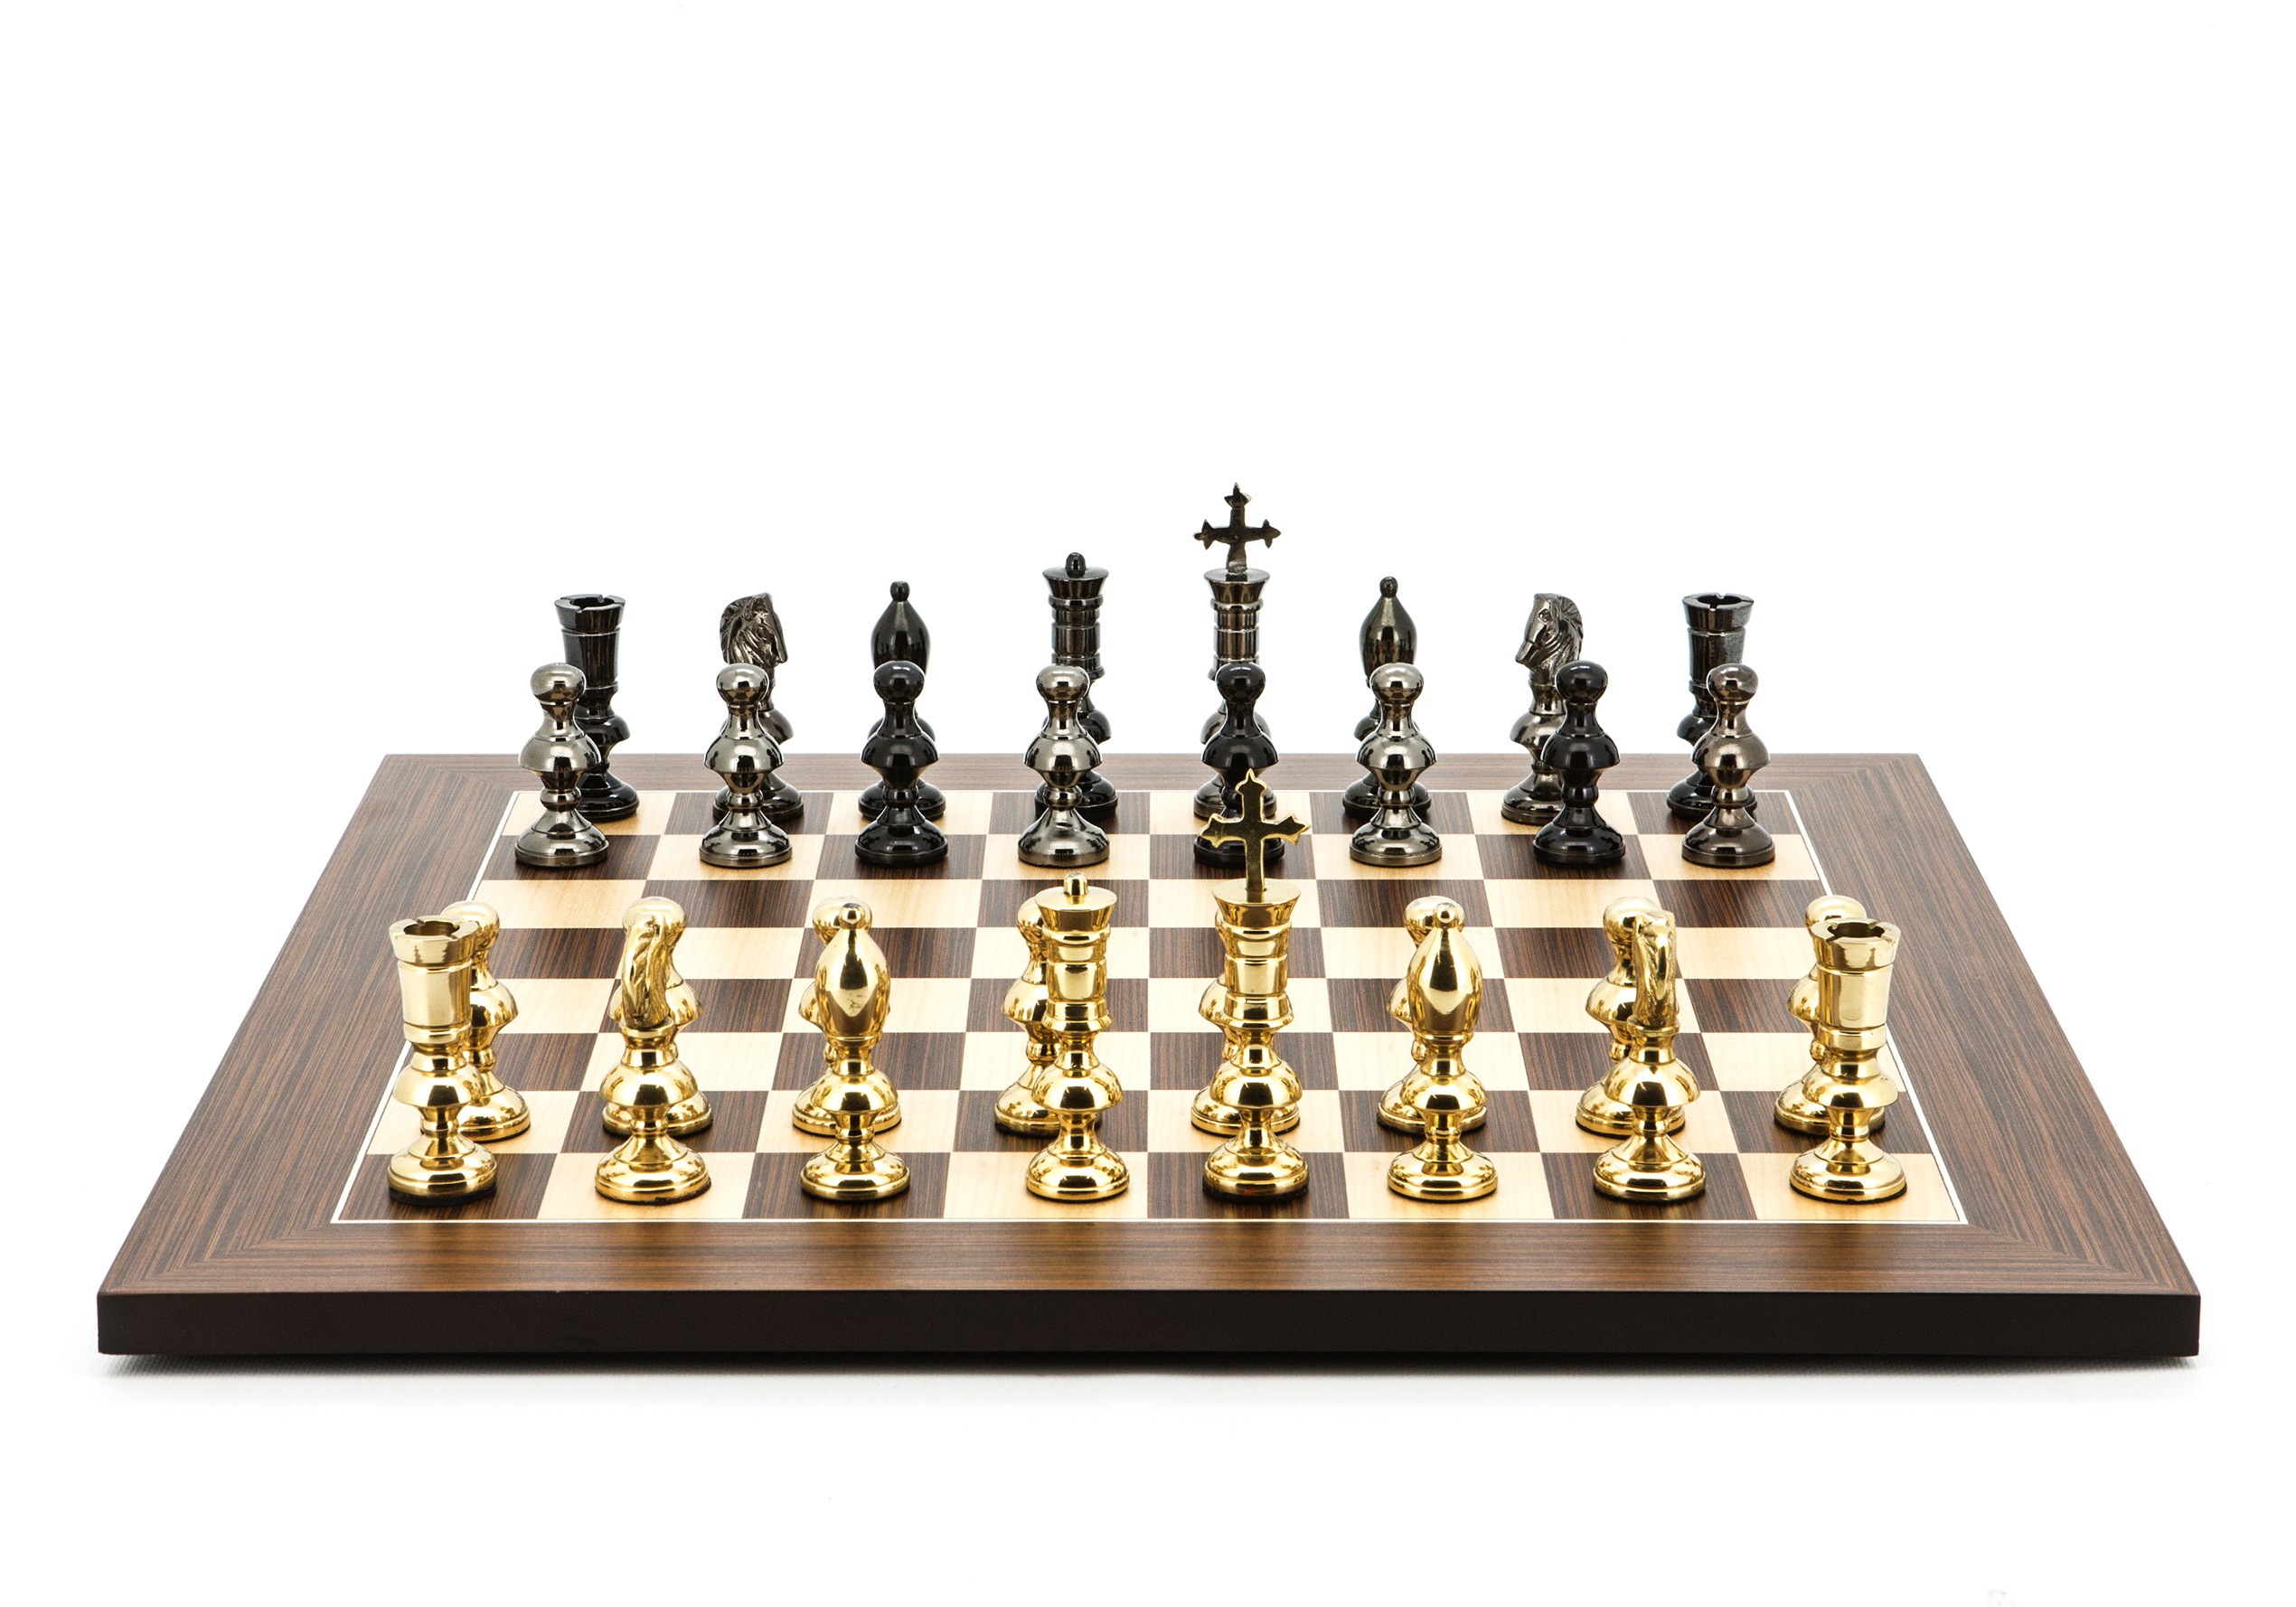 Dal Rossi Italy Chess Set Palisander / Maple Flat Board 50cm, With Metal Dark Titanium and Gold Chessmen 110mm